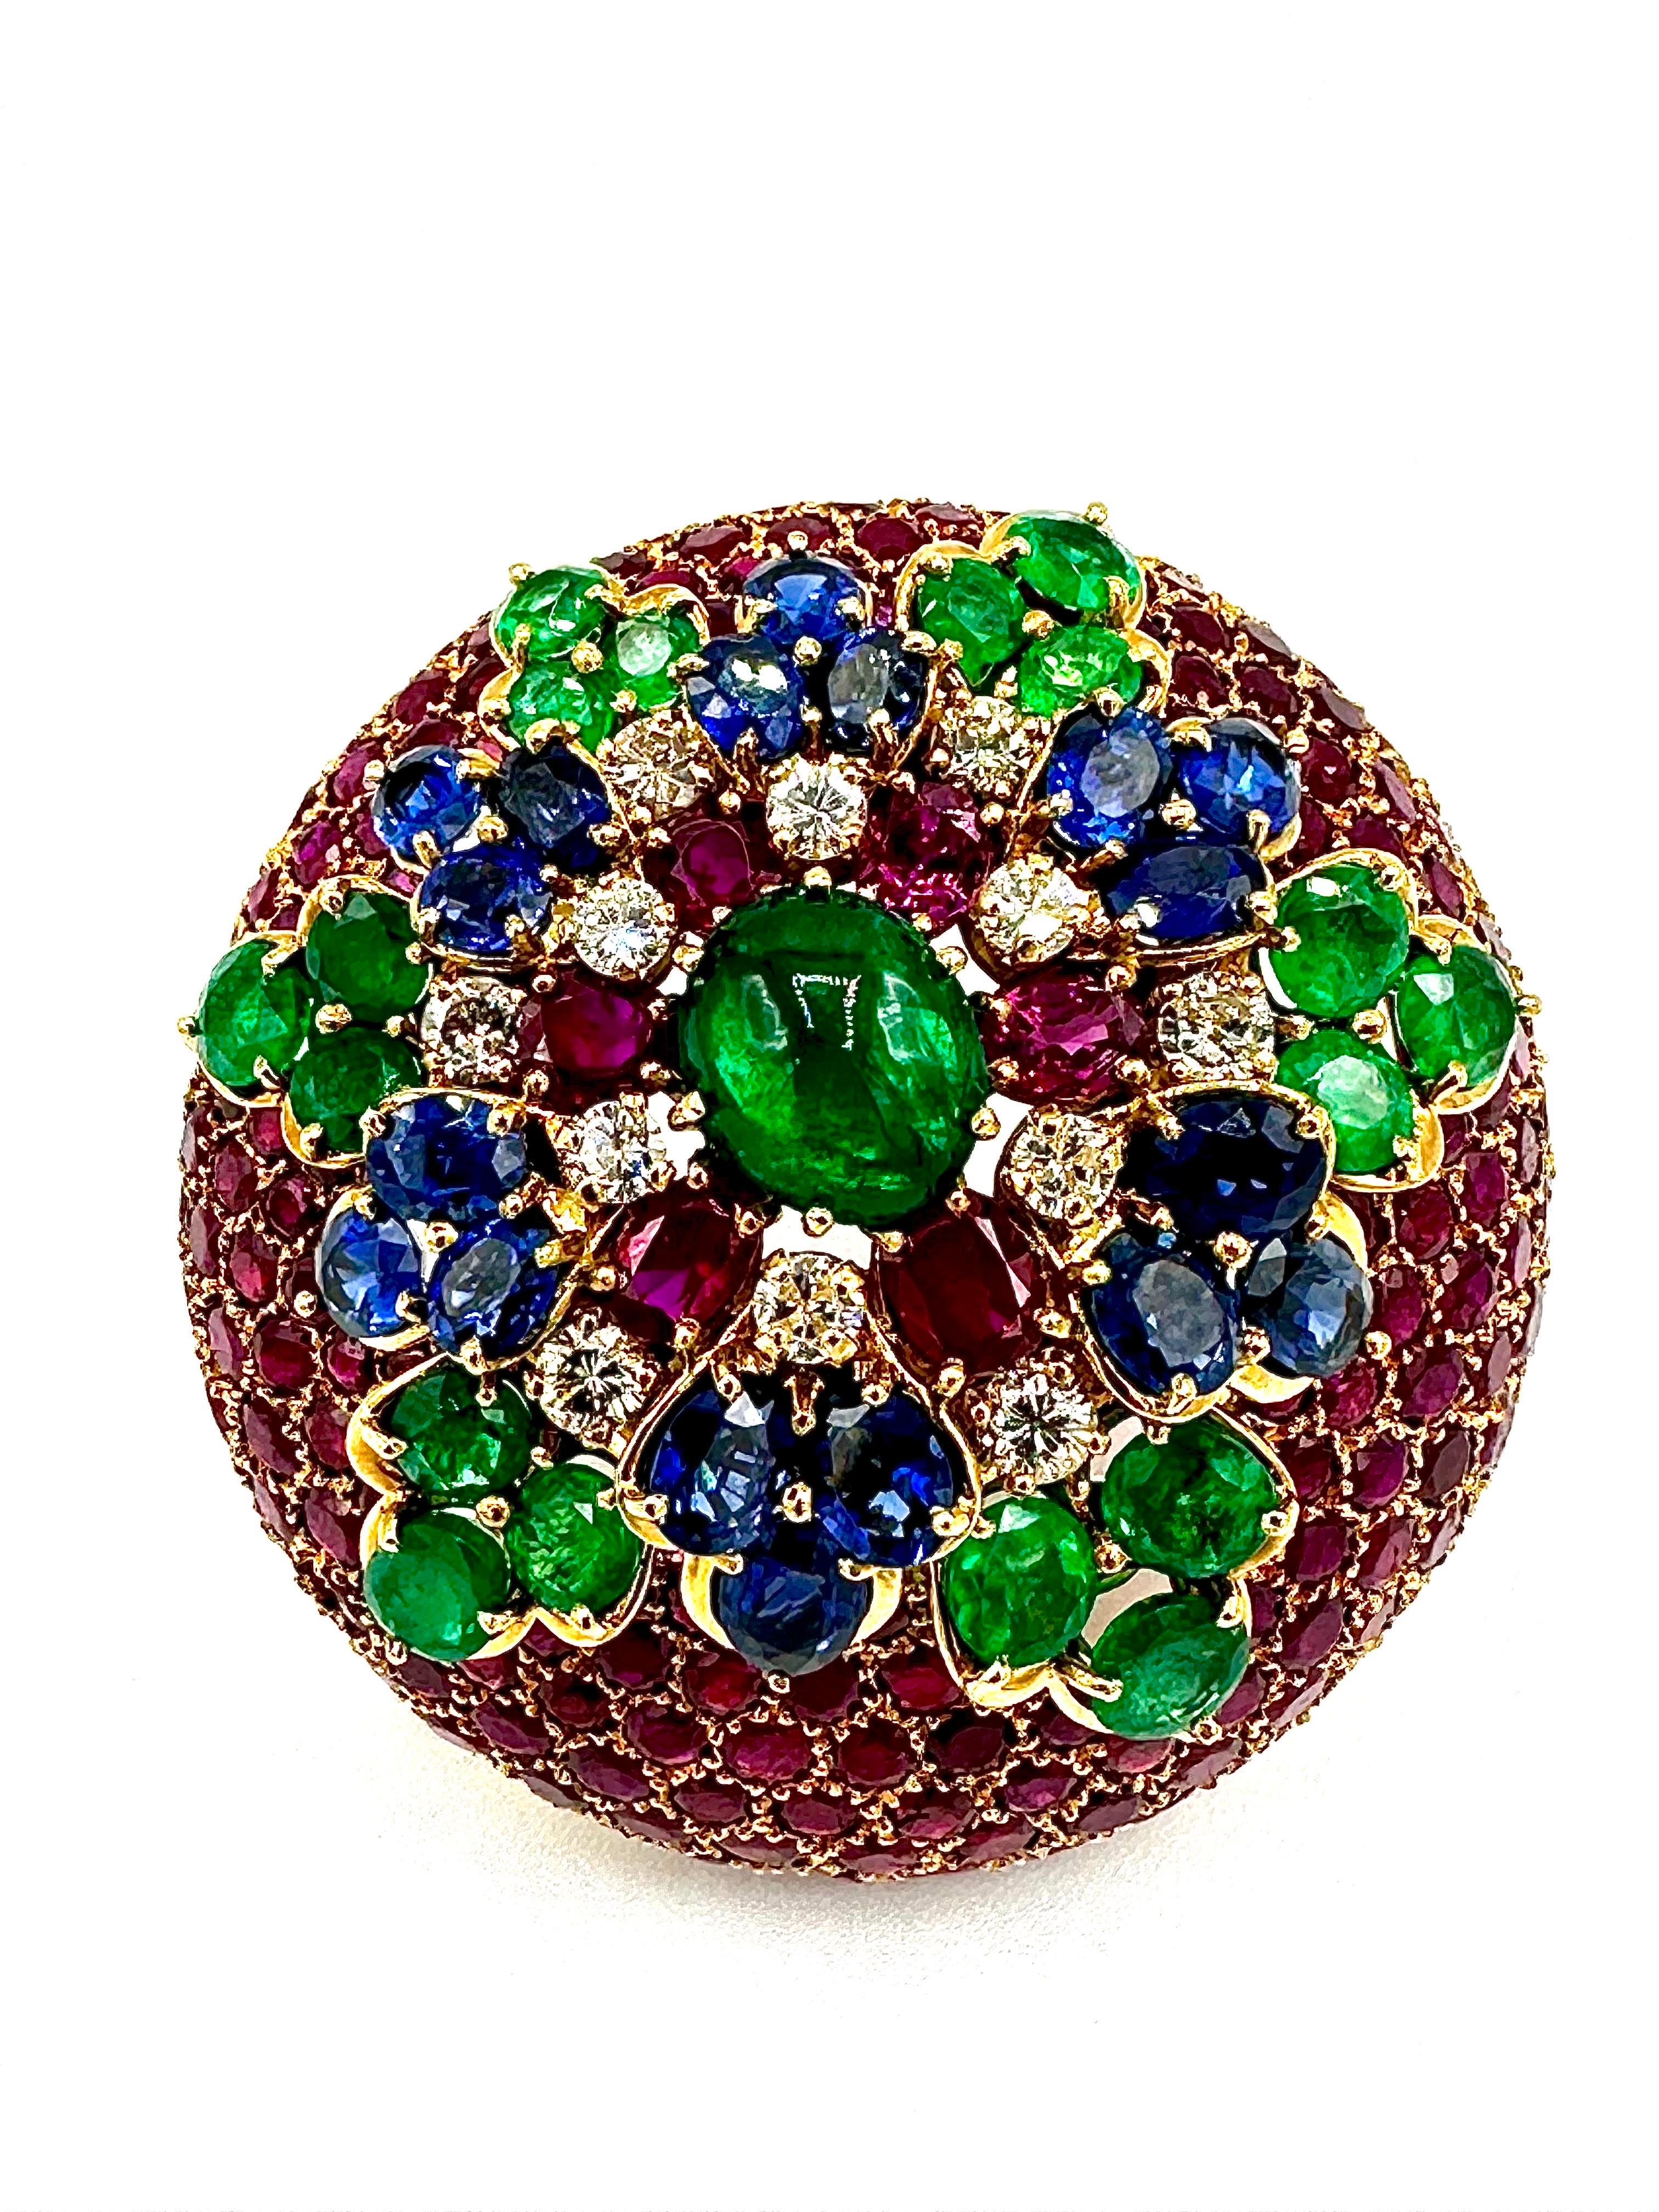 This brooch has an amazing array of colors!  The brooch contains over 35.00 carats in combination of all the Diamonds and Gemstones.  This is designed in a domed shape, with honeycomb shaped settings for the round Rubies, leading into a star pattern